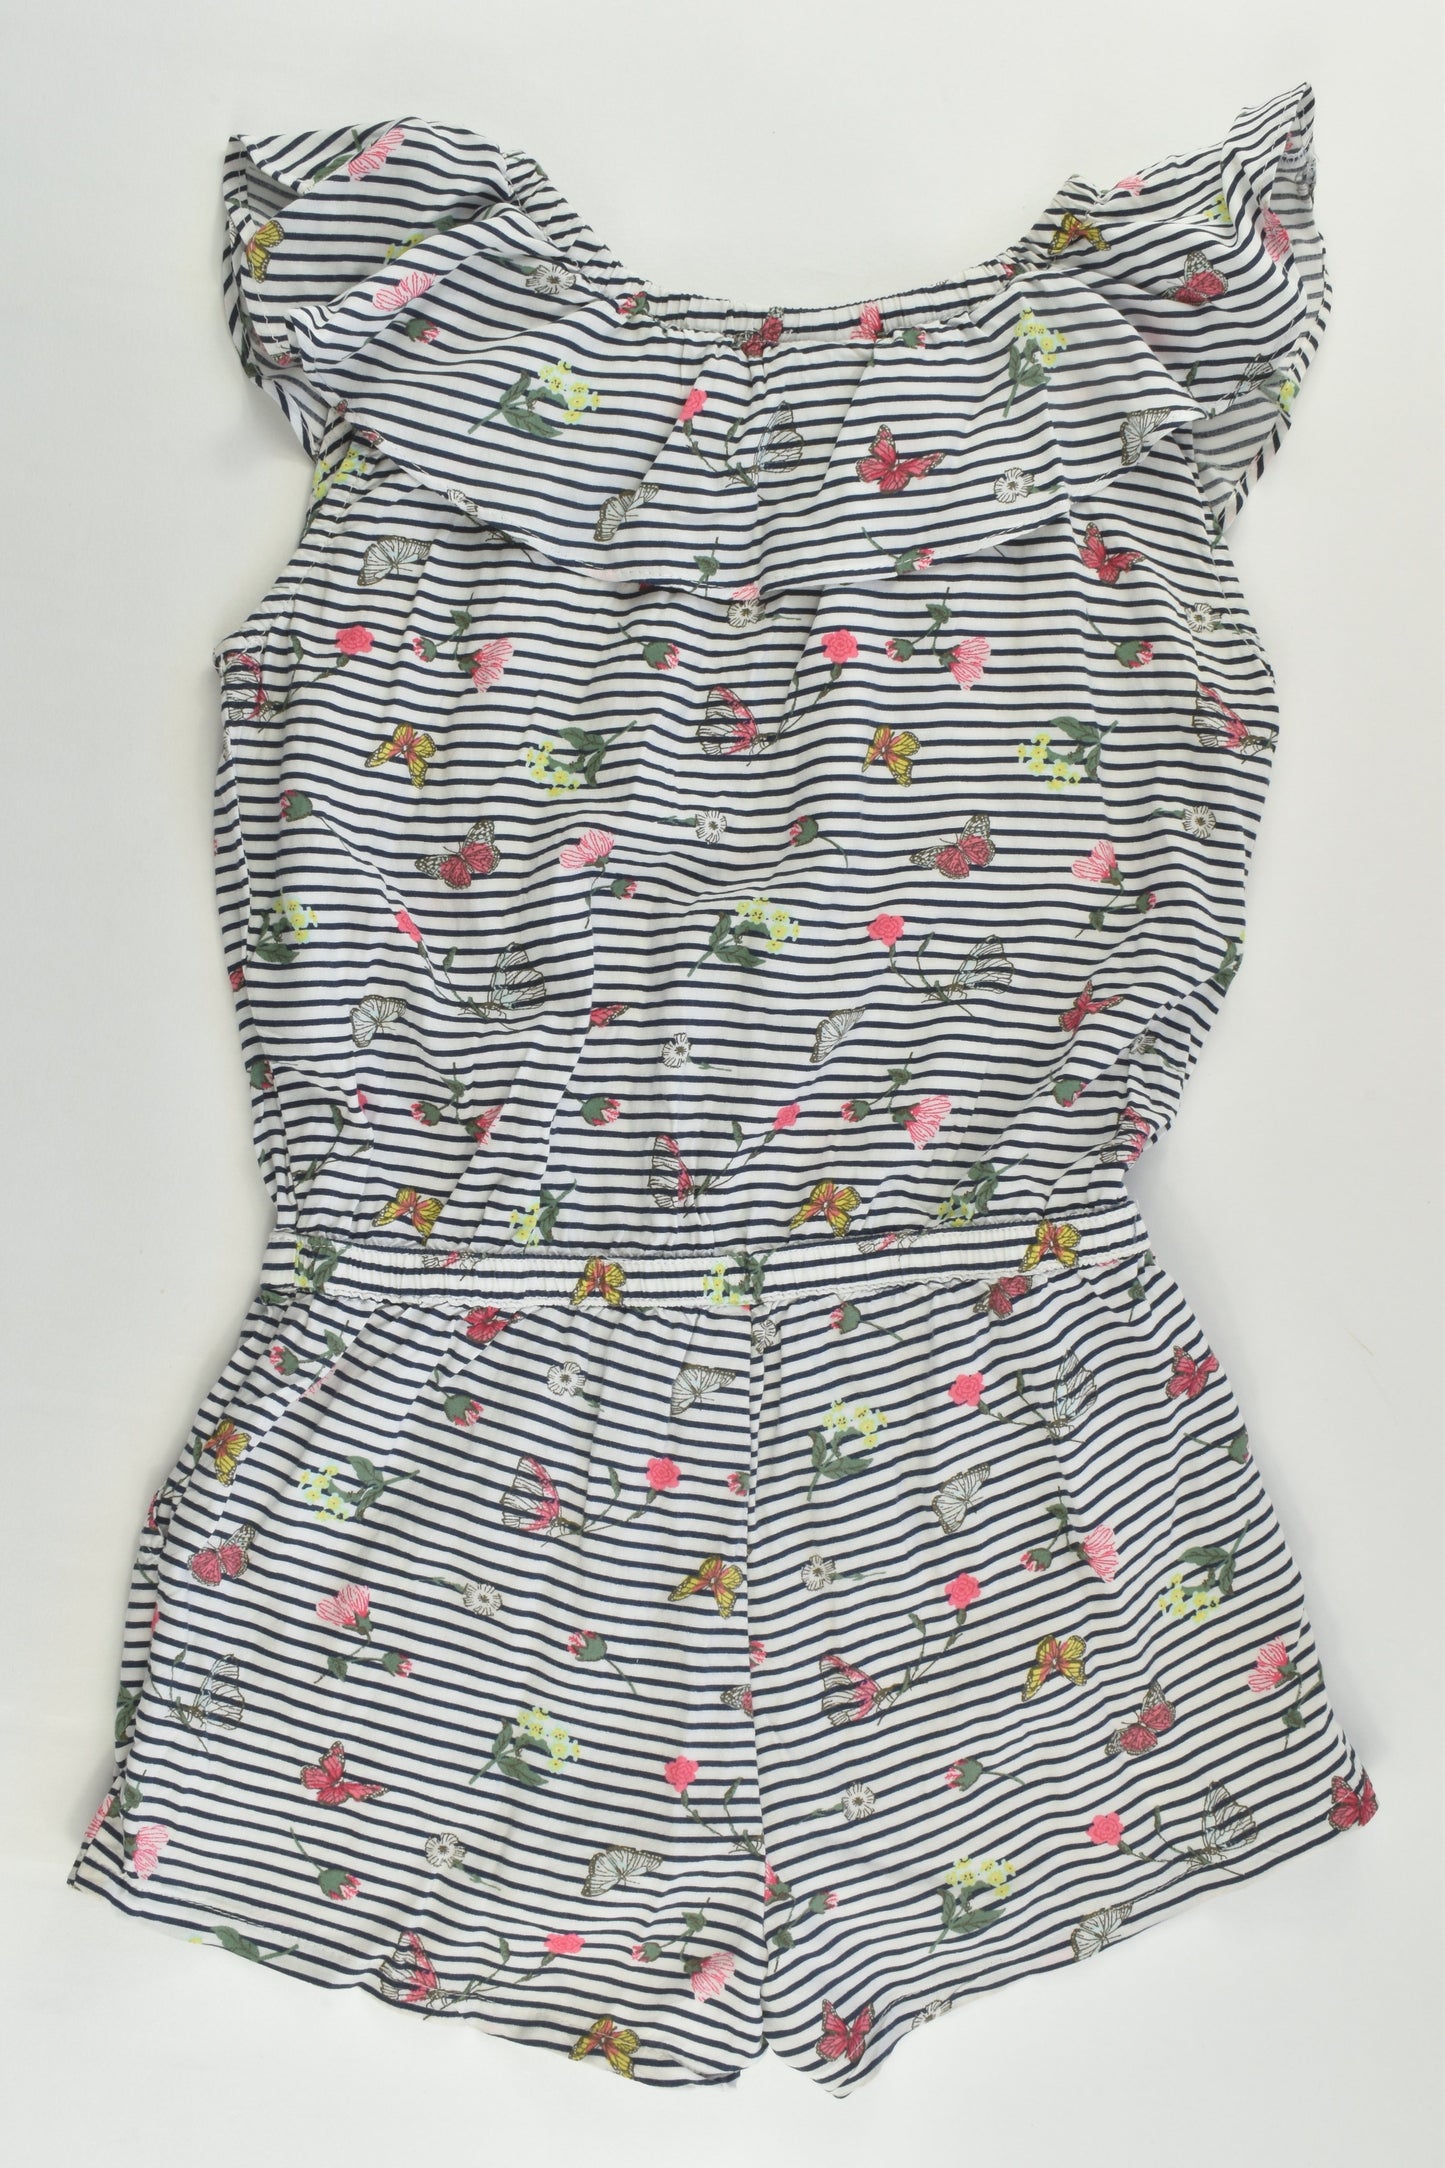 Hema Size 3-4 (98/104 cm) Butterflies and Flowers Playsuit